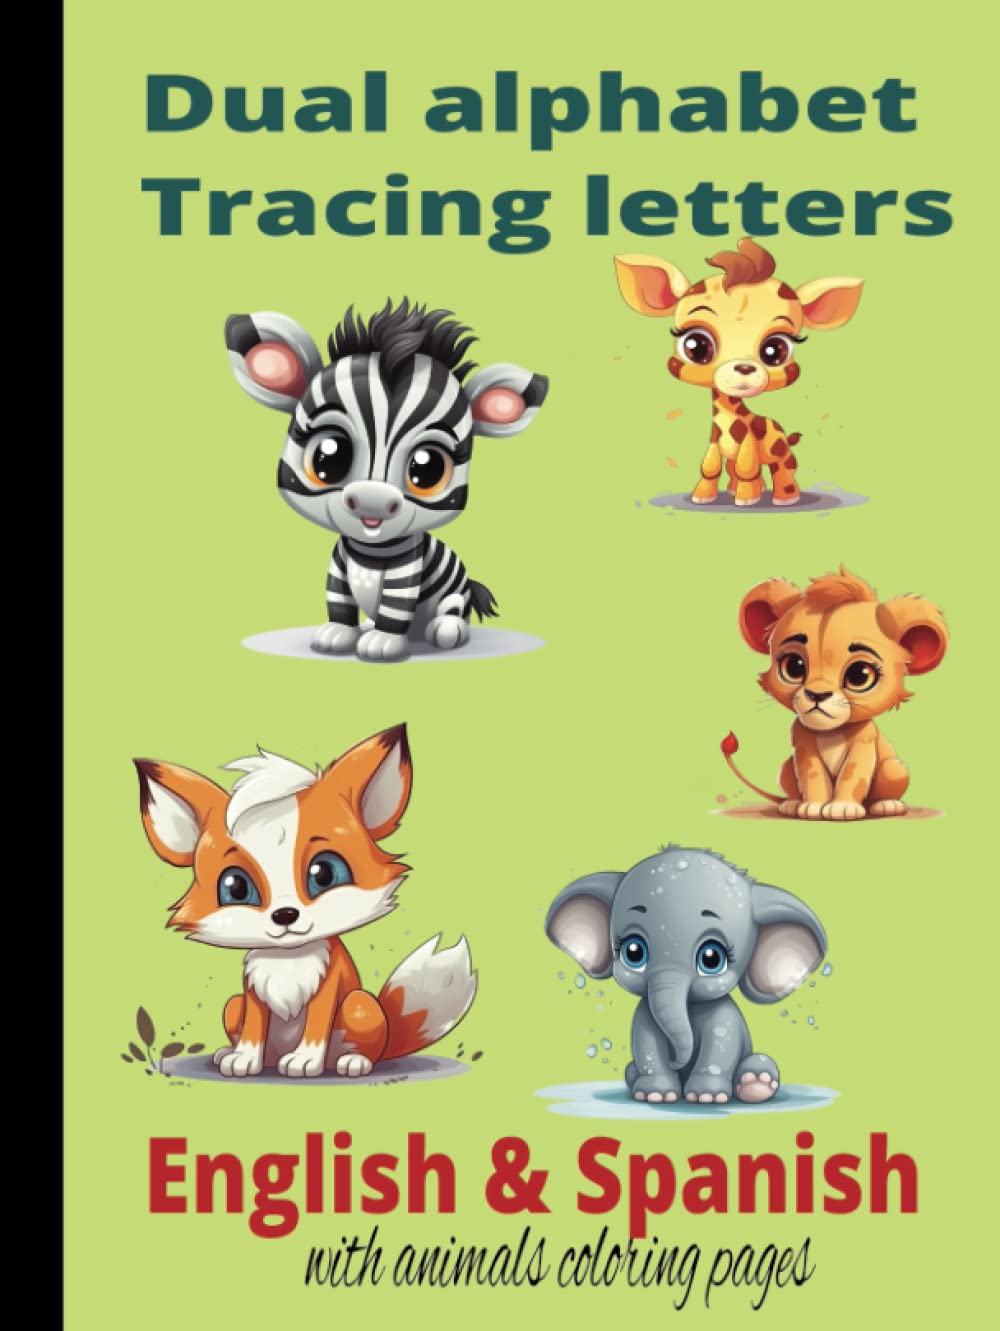 DUAL ALPHABET LETTERS TRACING: ENGLISH AND SPANISH with coloring pages